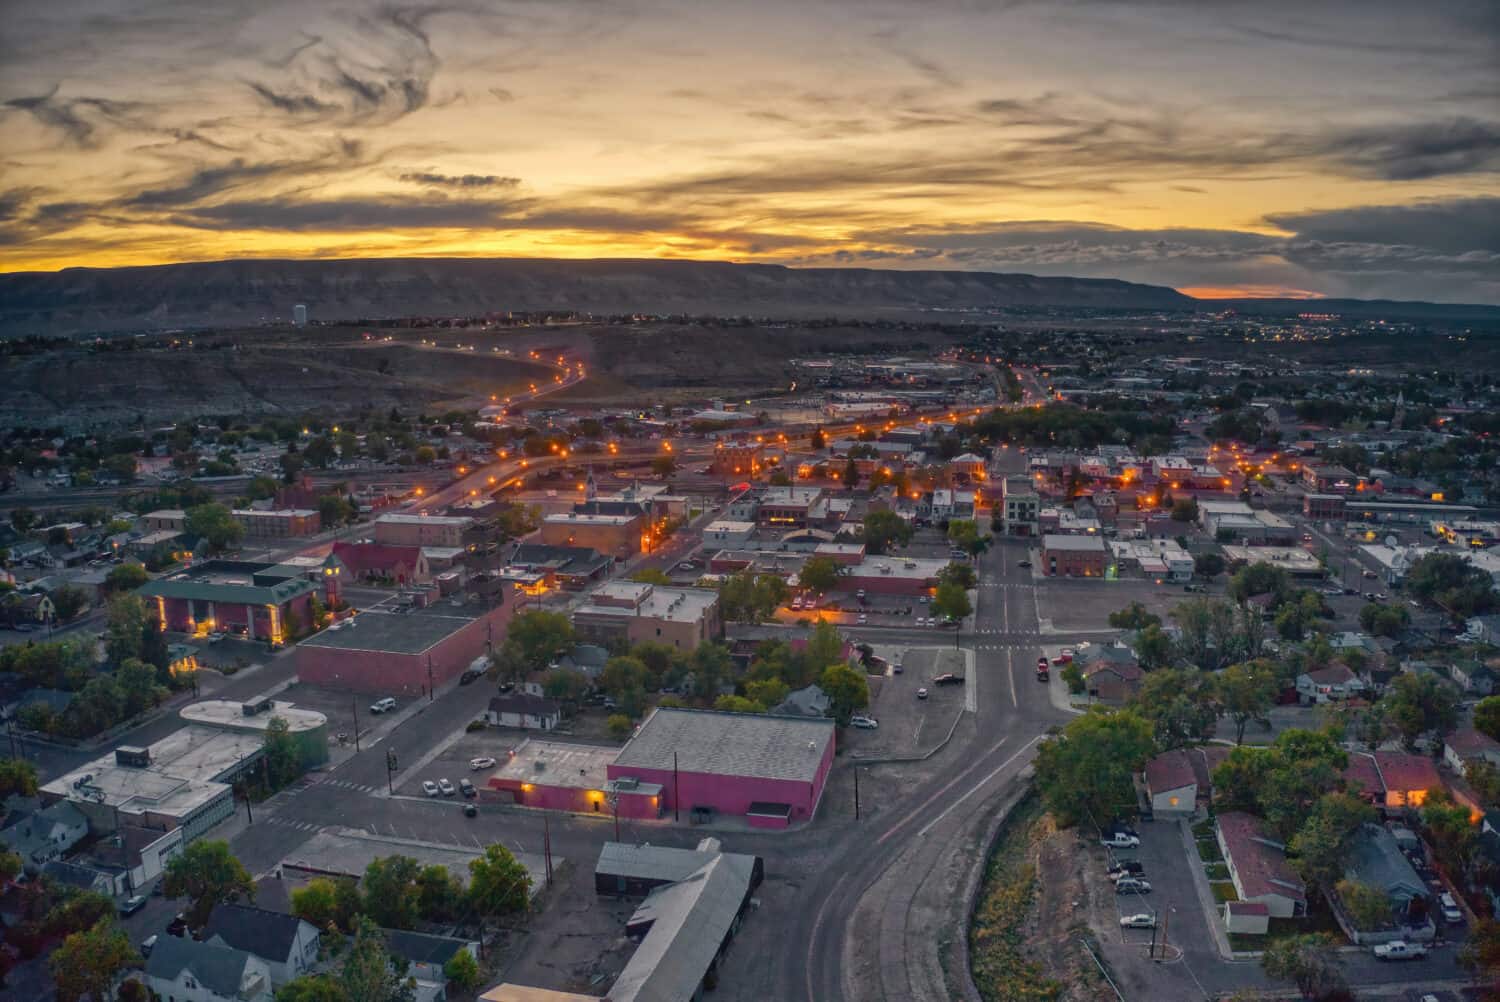 <p>A high-desert community in southeastern Wyoming, <a href="https://travelwyoming.com/places-to-go/cities/rock-springs/" rel="noopener">Rock Springs</a> is the state’s fifth most populated city. The population of Rock Springs is just over 23,000 people who represent at least 50 different nationalities due to the area’s history as a coal mining hub.</p>    <p>Today, Rock Springs boasts a vibrant main street with shops and restaurants. Western Wyoming Community College attracts nearly 2,000 students to Rock Springs each year. Despite the city’s modern amenities, there are several historical sites like the Fort Supply Monument and the Tri-Territory Historic Monument.</p>    <h3>Up Next:</h3>     <ul>         <li><a href="https://a-z-animals.com/blog/best-kept-secret-places-to-retire-in-maine/?utm_campaign=msn&utm_source=msn_slideshow&utm_content=1299021&utm_medium=more_from">5 Best Kept Secret Places to Retire In Maine</a></li>         <li><a href="https://a-z-animals.com/blog/incredible-caves-in-wyoming-from-popular-spots-to-hidden-treasures/?utm_campaign=msn&utm_source=msn_slideshow&utm_content=1299021&utm_medium=more_from">5 Incredible Caves in Wyoming (From Popular Spots to Hidden Treasures)</a></li>         <li><a href="https://a-z-animals.com/blog/secretly-amazing-places-to-retire-in-arizona/?utm_campaign=msn&utm_source=msn_slideshow&utm_content=1299021&utm_medium=more_from">8 Secretly Amazing Places to Retire in Arizona</a></li>     </ul>